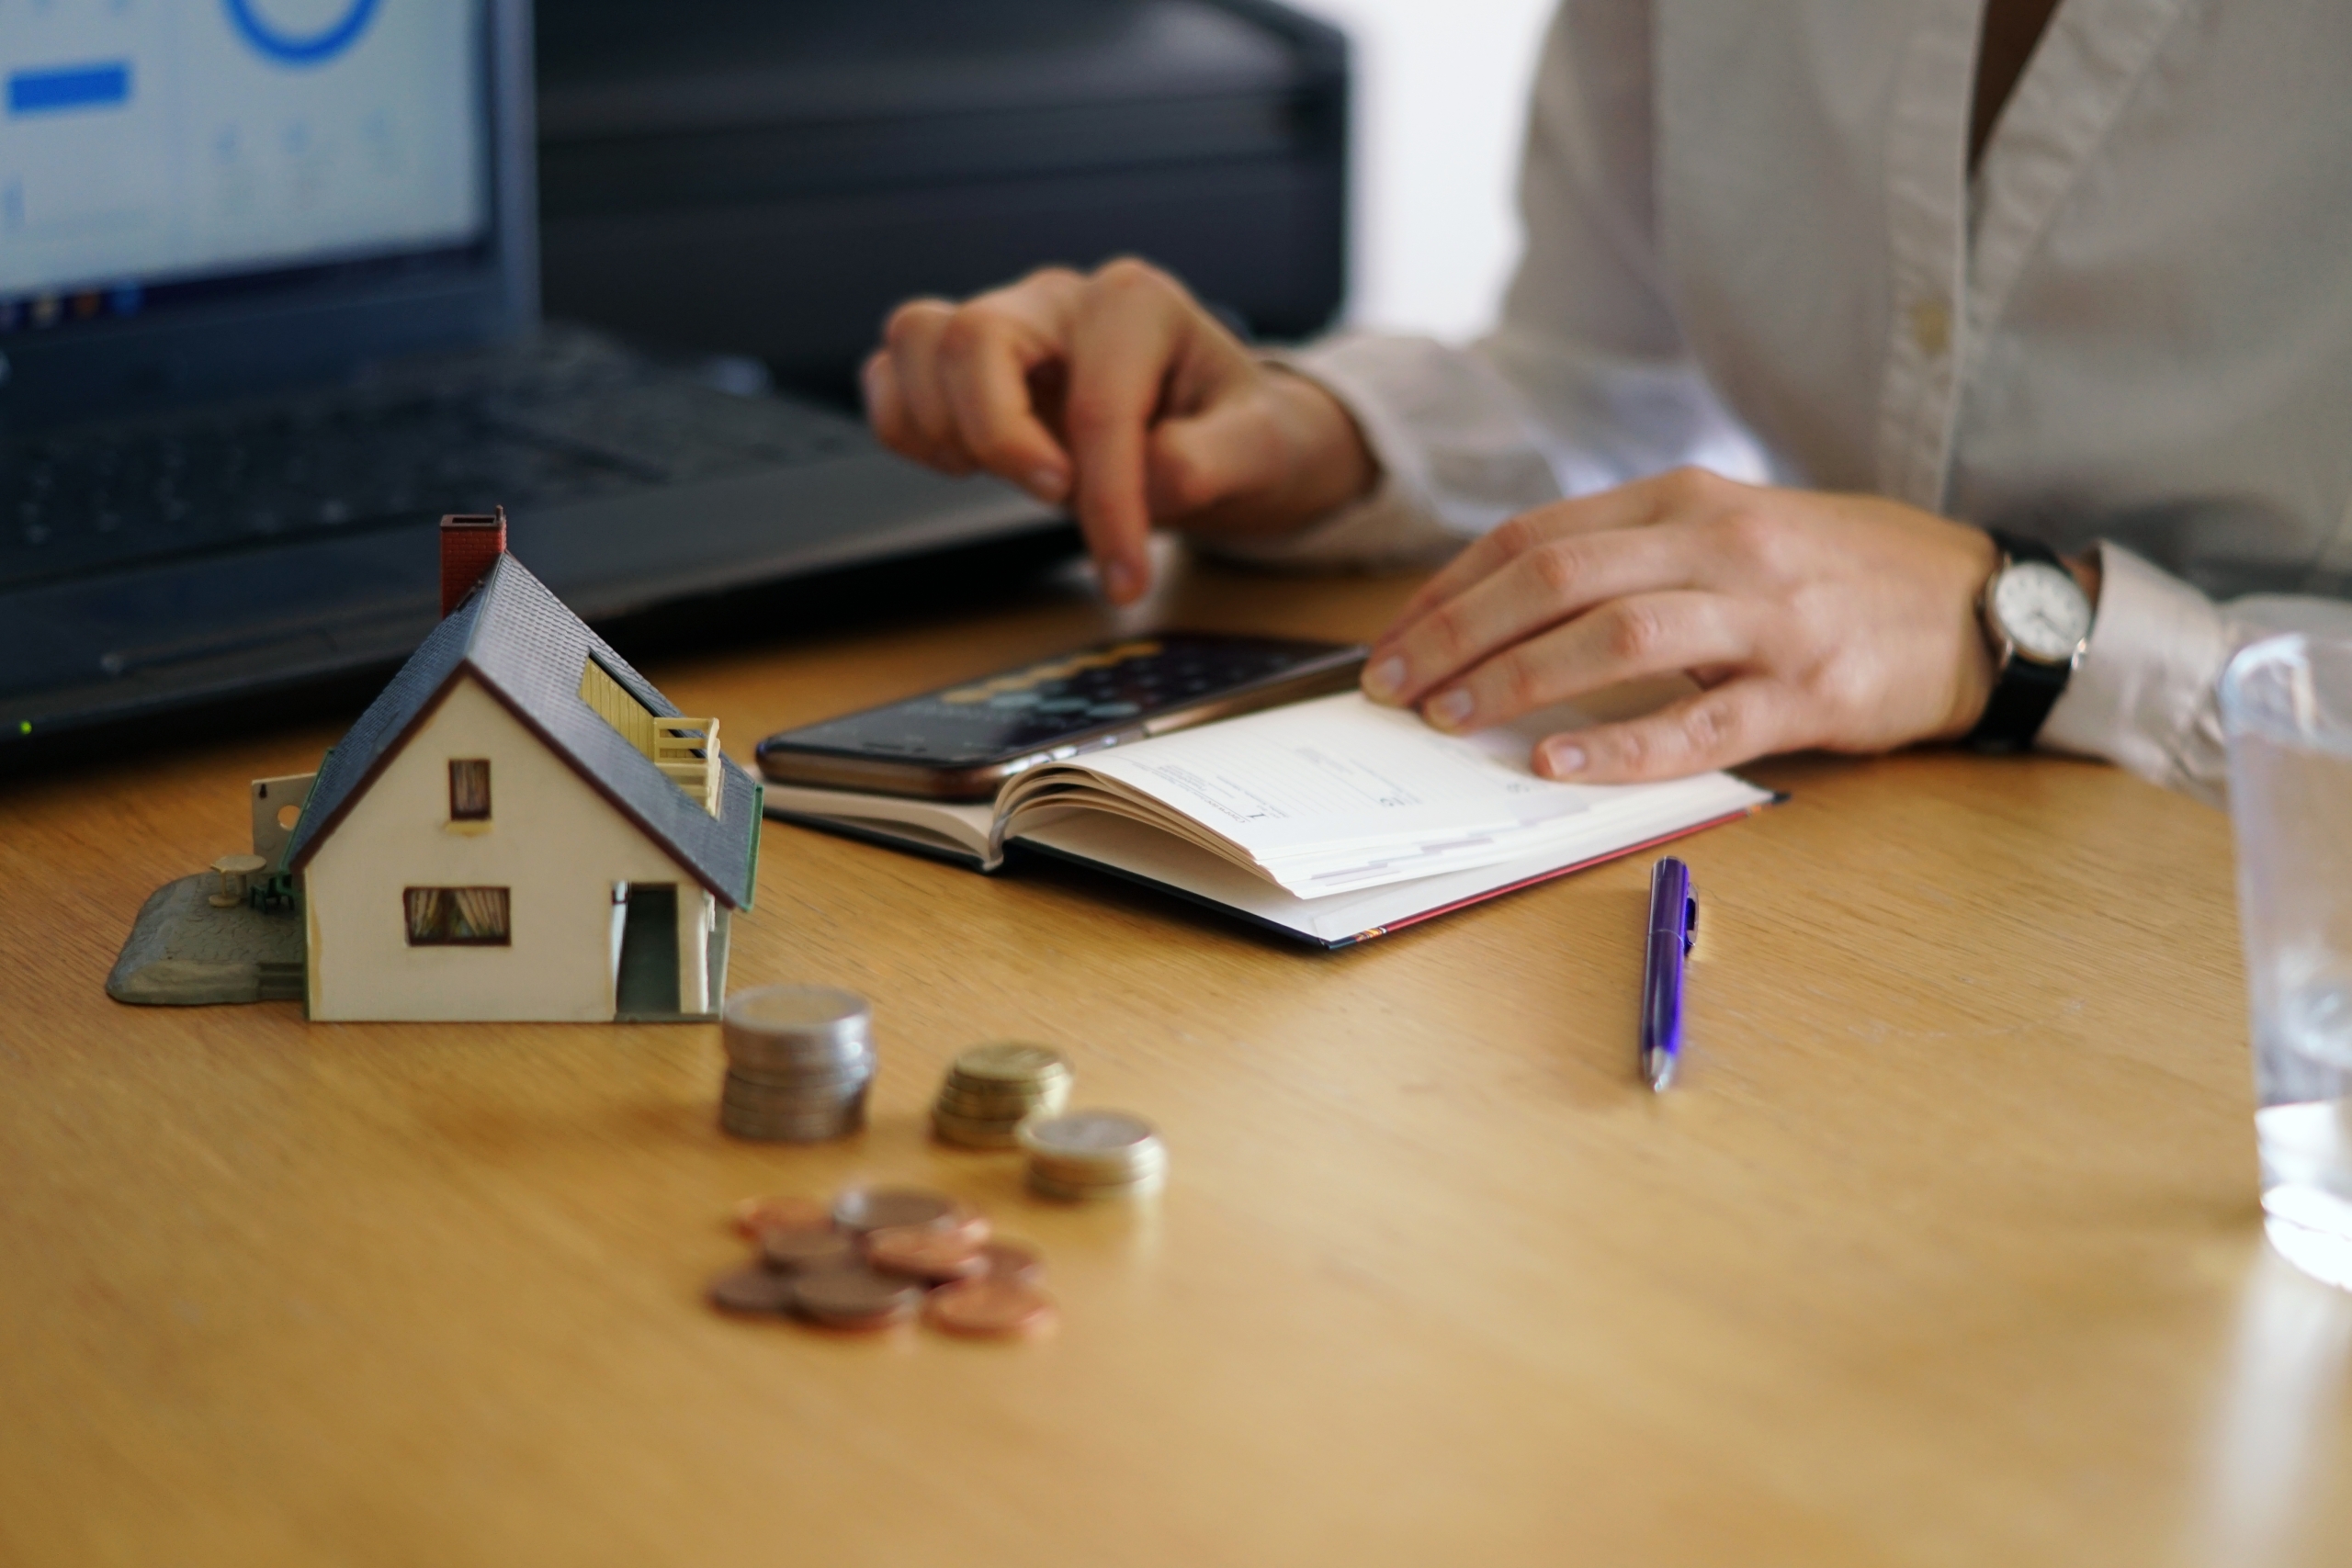 Refinancing a Home Loan: 5 Reasons to Consider Refinancing in 2023